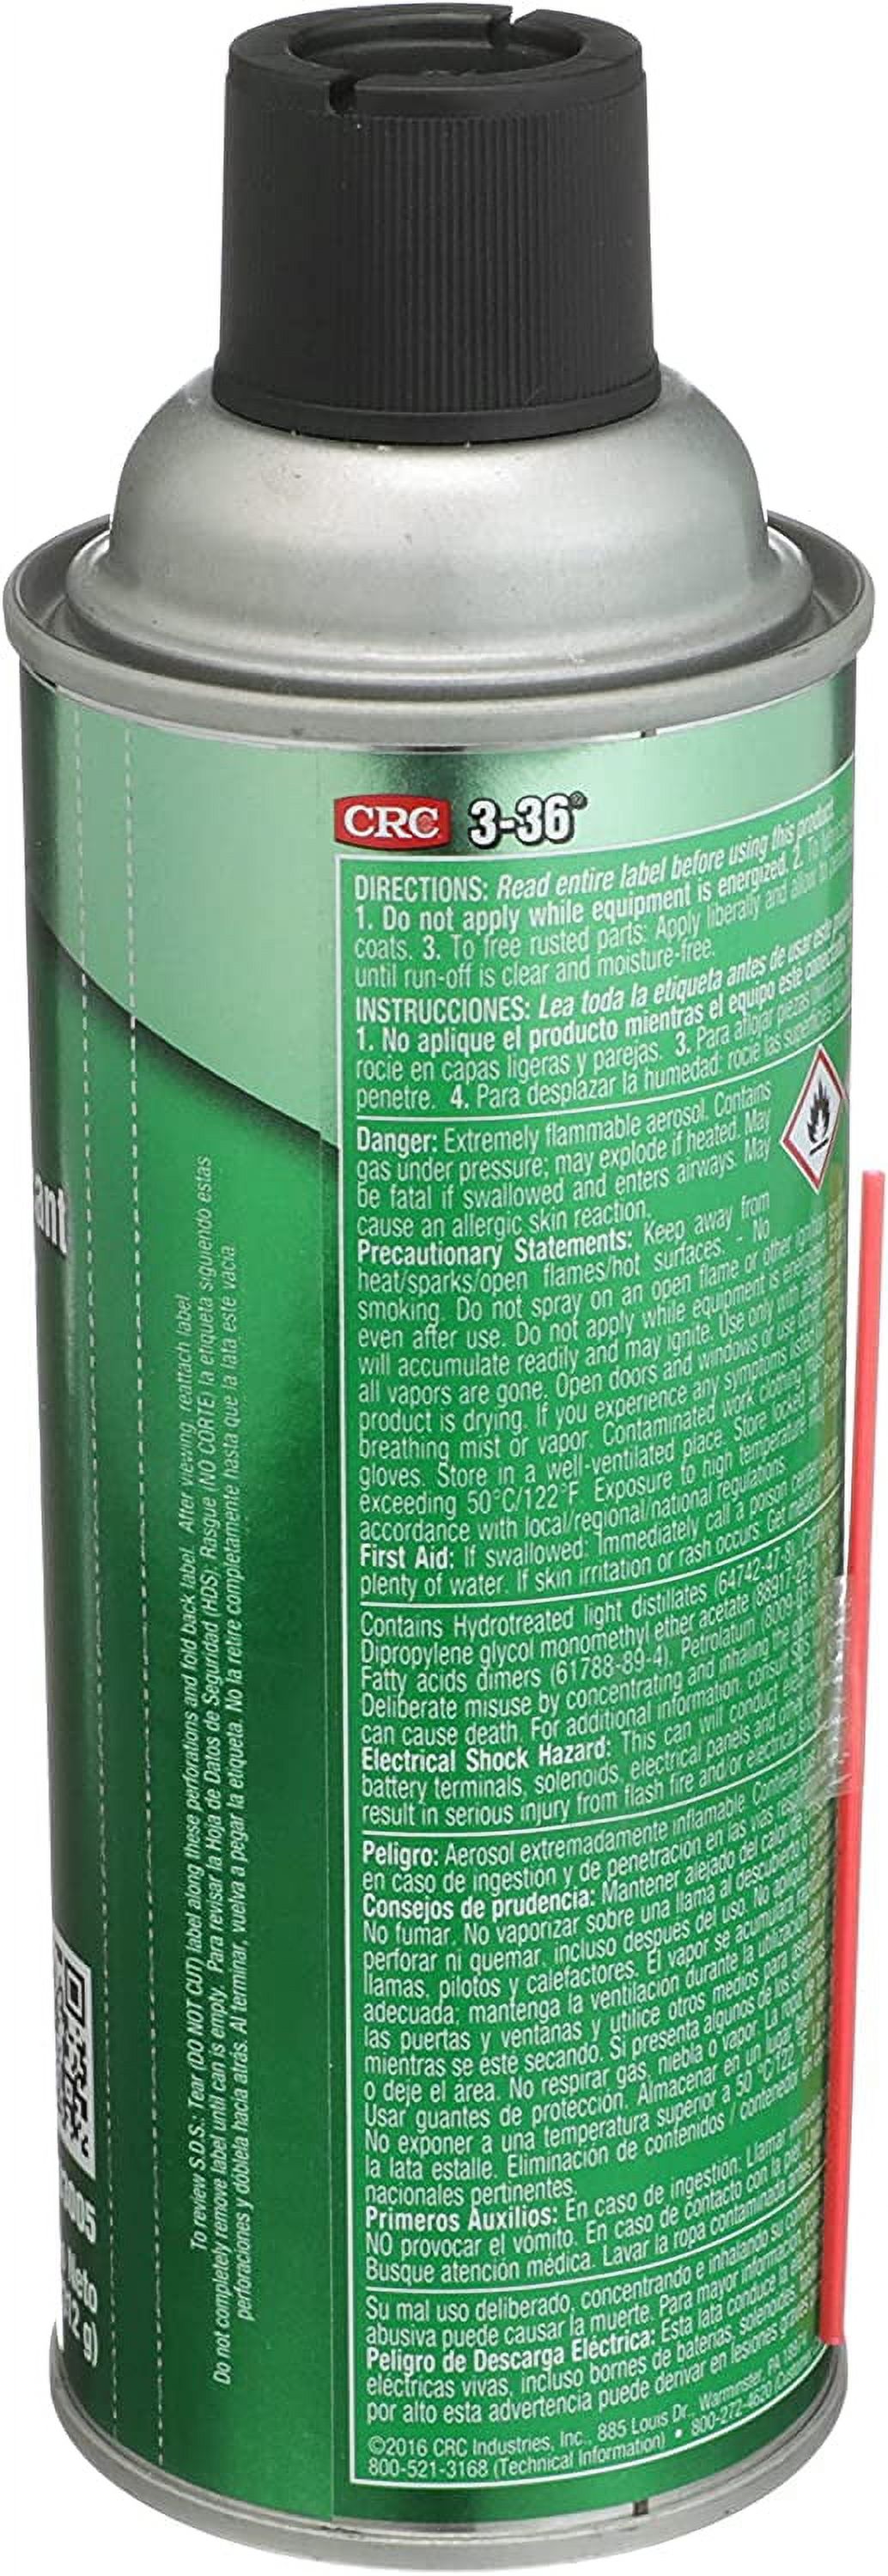 CRC 3-36 Multi-Purpose Lubricant and Corrosion Inhibitor, 11 oz Aerosol Can, Clear/Blue/Green - image 5 of 10